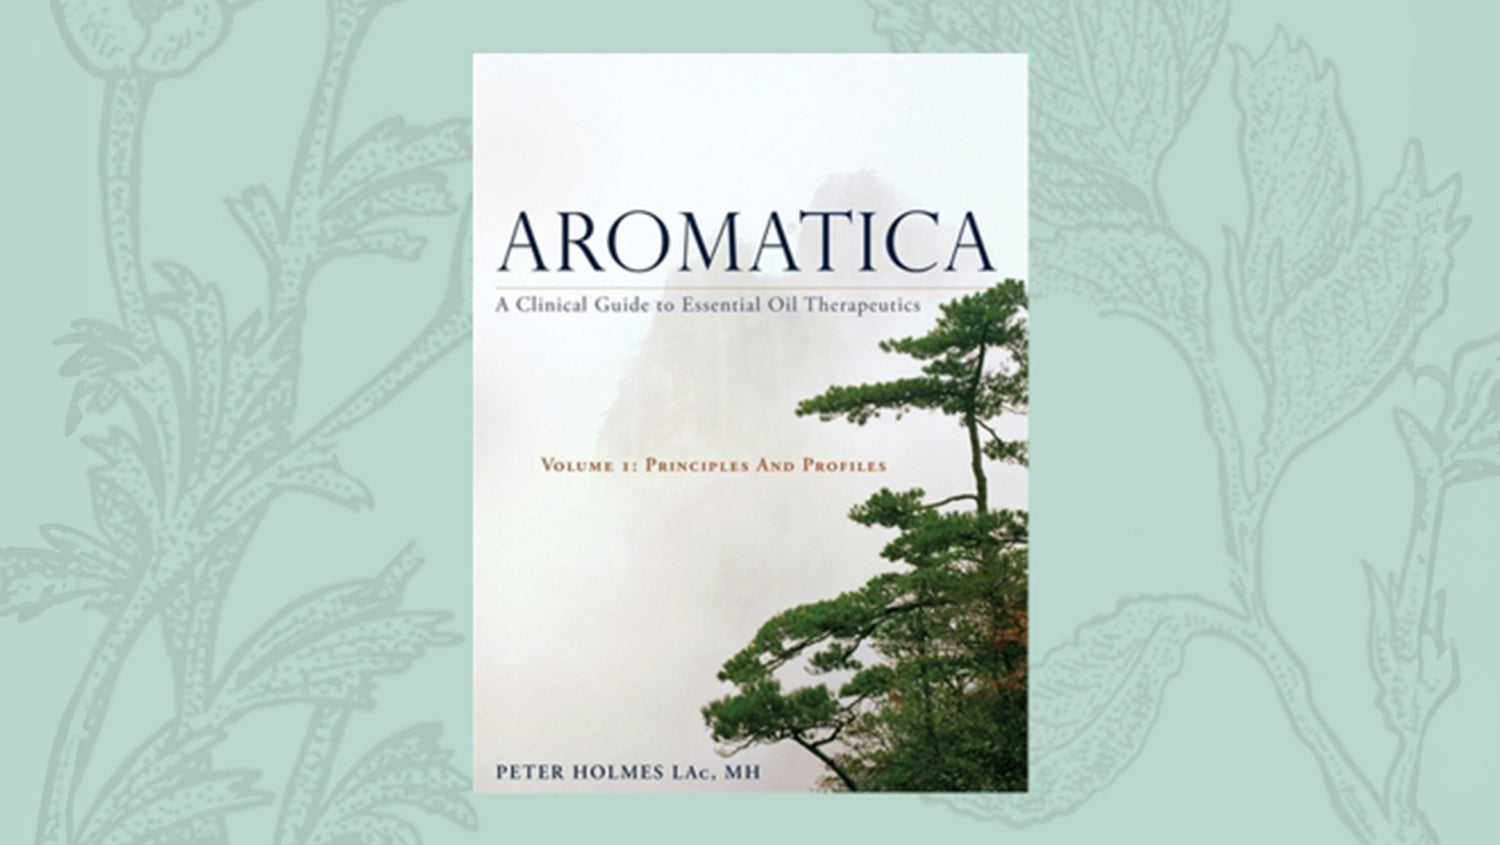 Aromatica: A Clinical Guide to Essential Oil Therapeutics – Volume I: Principles and Profiles